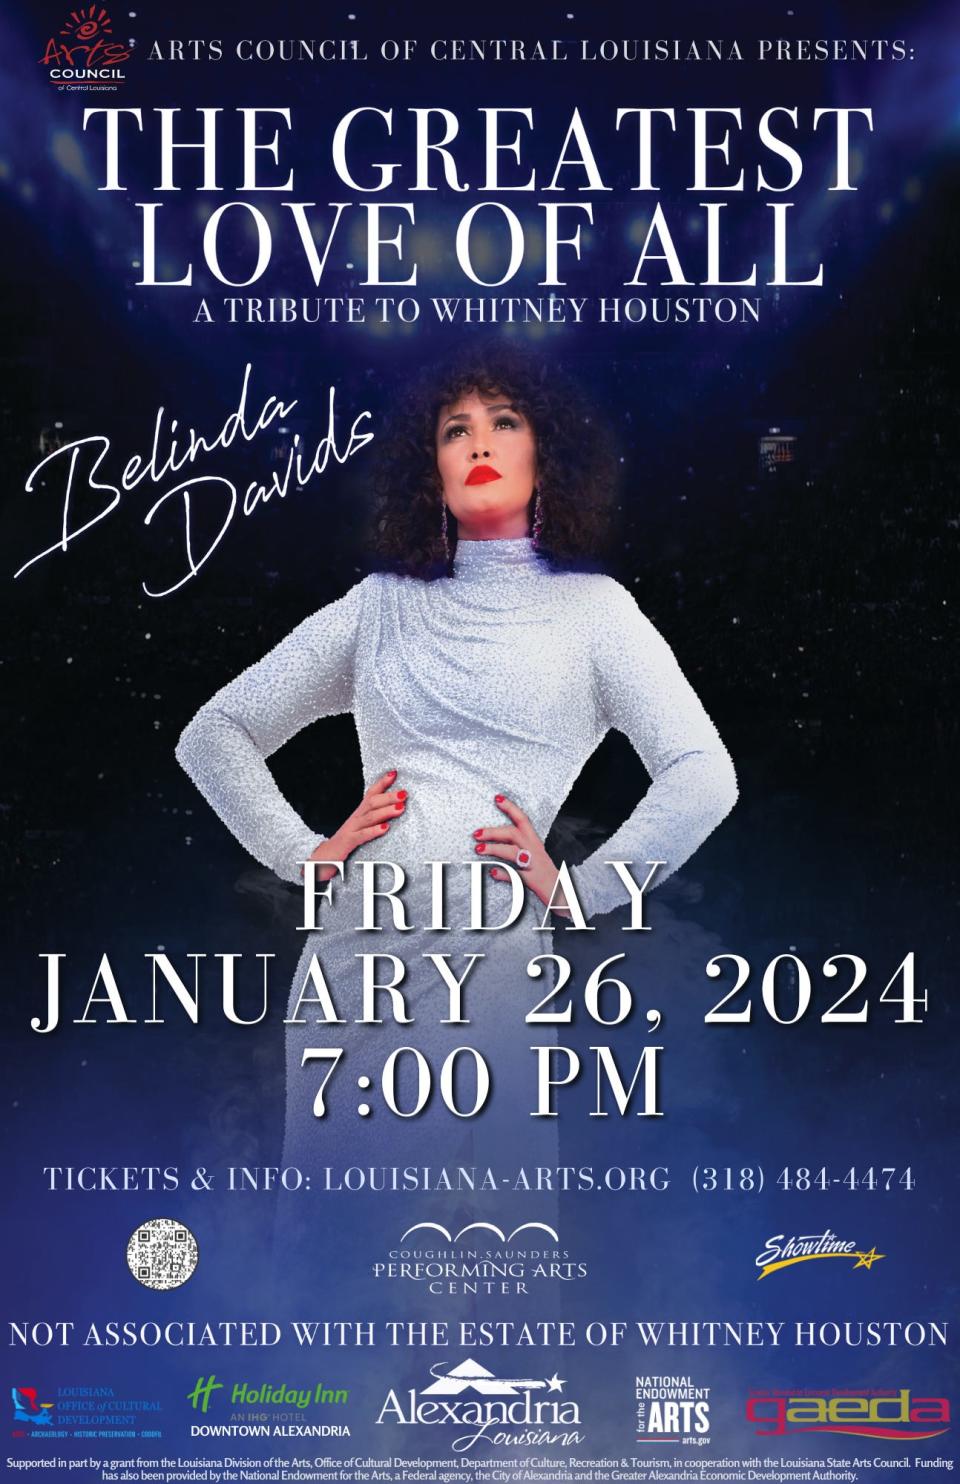 Fans of the late singer and actress Whitney Houston will have a chance to hear her greatest hits performed by tribute artist Belinda Davids when “The Greatest Love of All: A Tribute to Whitney Houston” takes the stage at the Coughlin-Saunders Performing Arts Center Friday, Jan. 26 at 7 p.m.